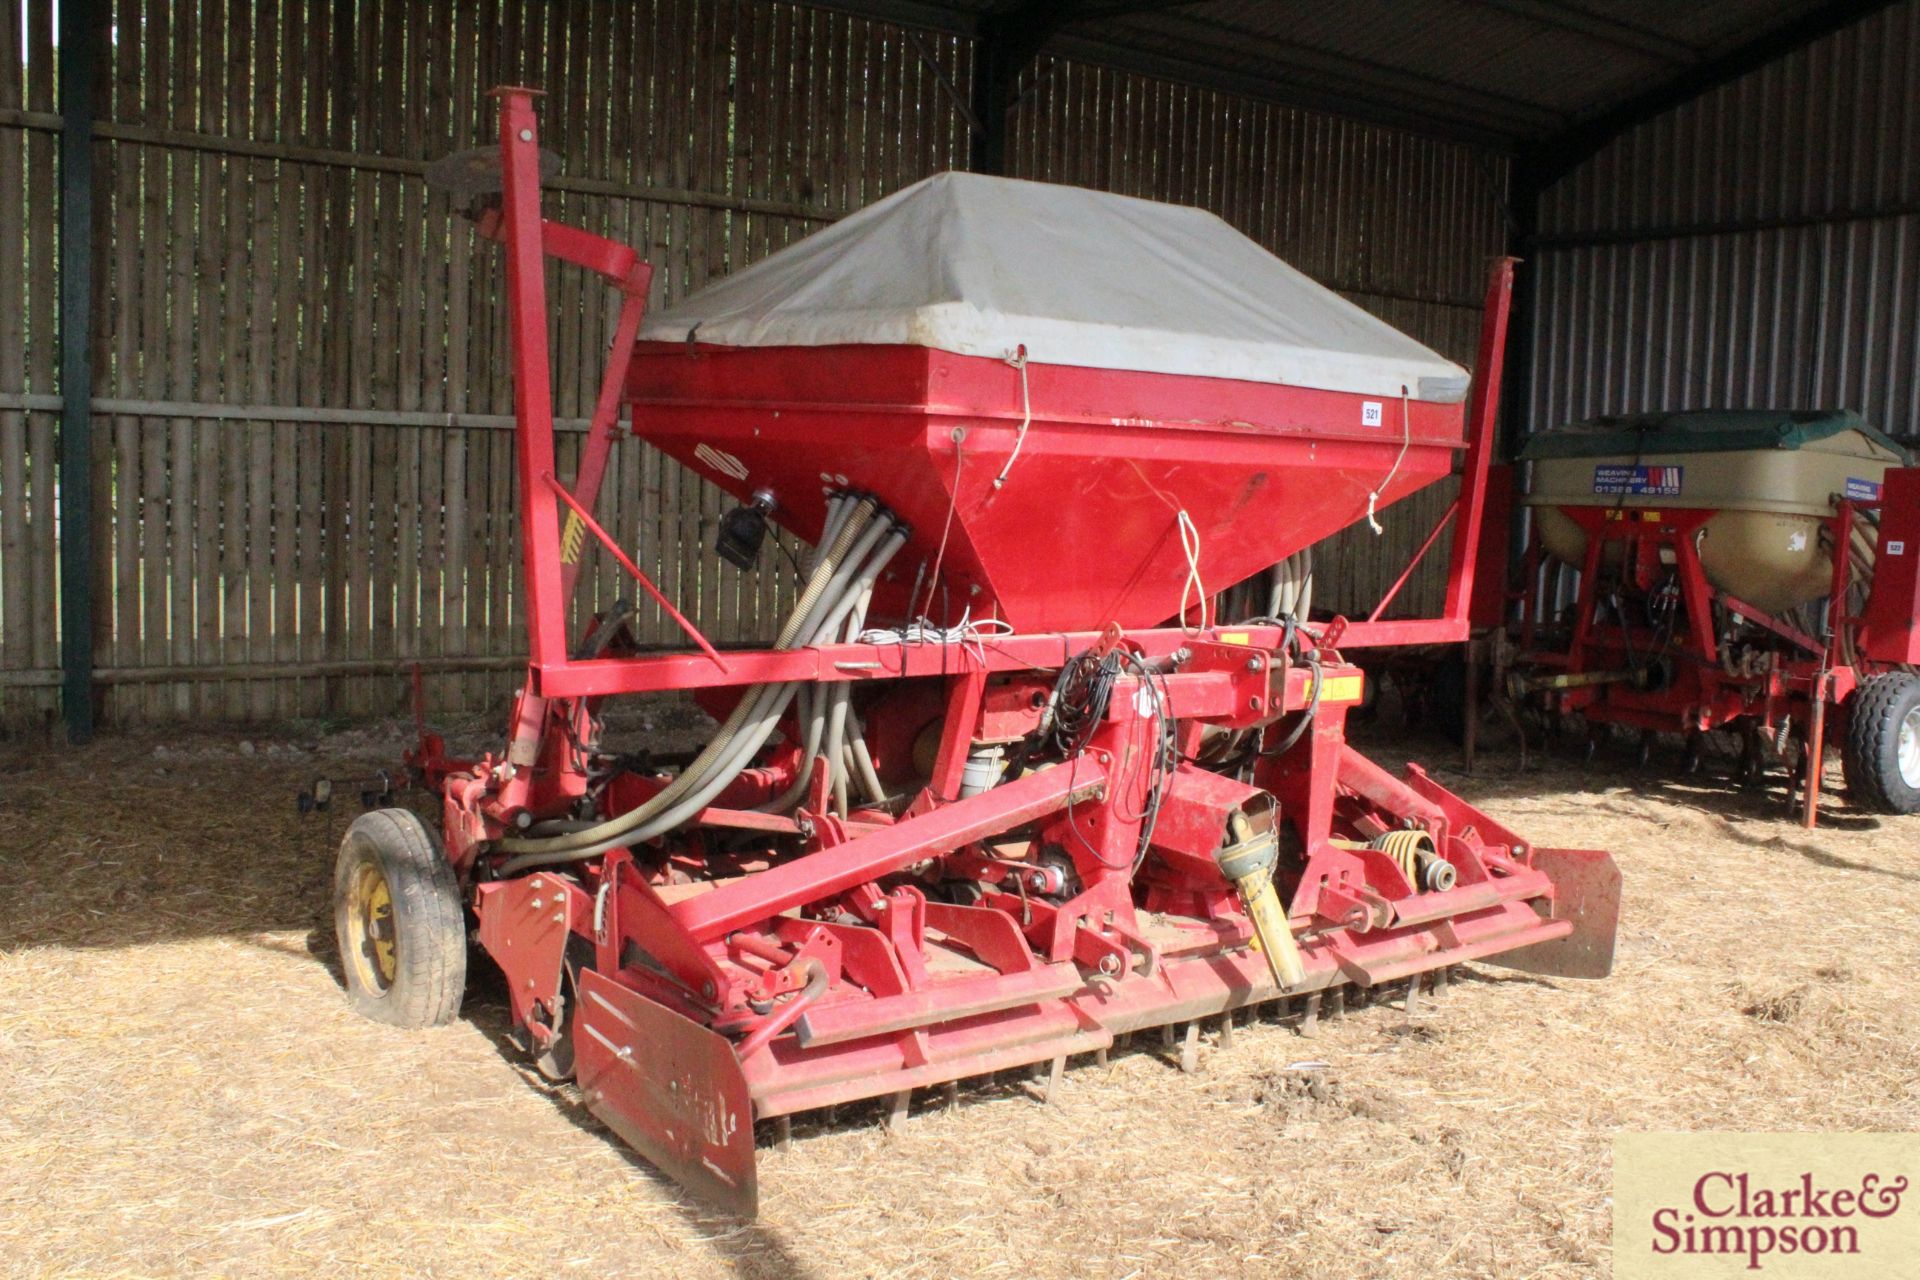 Lely/ Tulip Rotarra 3m power harrow. Serial number/ year to follow. With packer. Piggy backed with